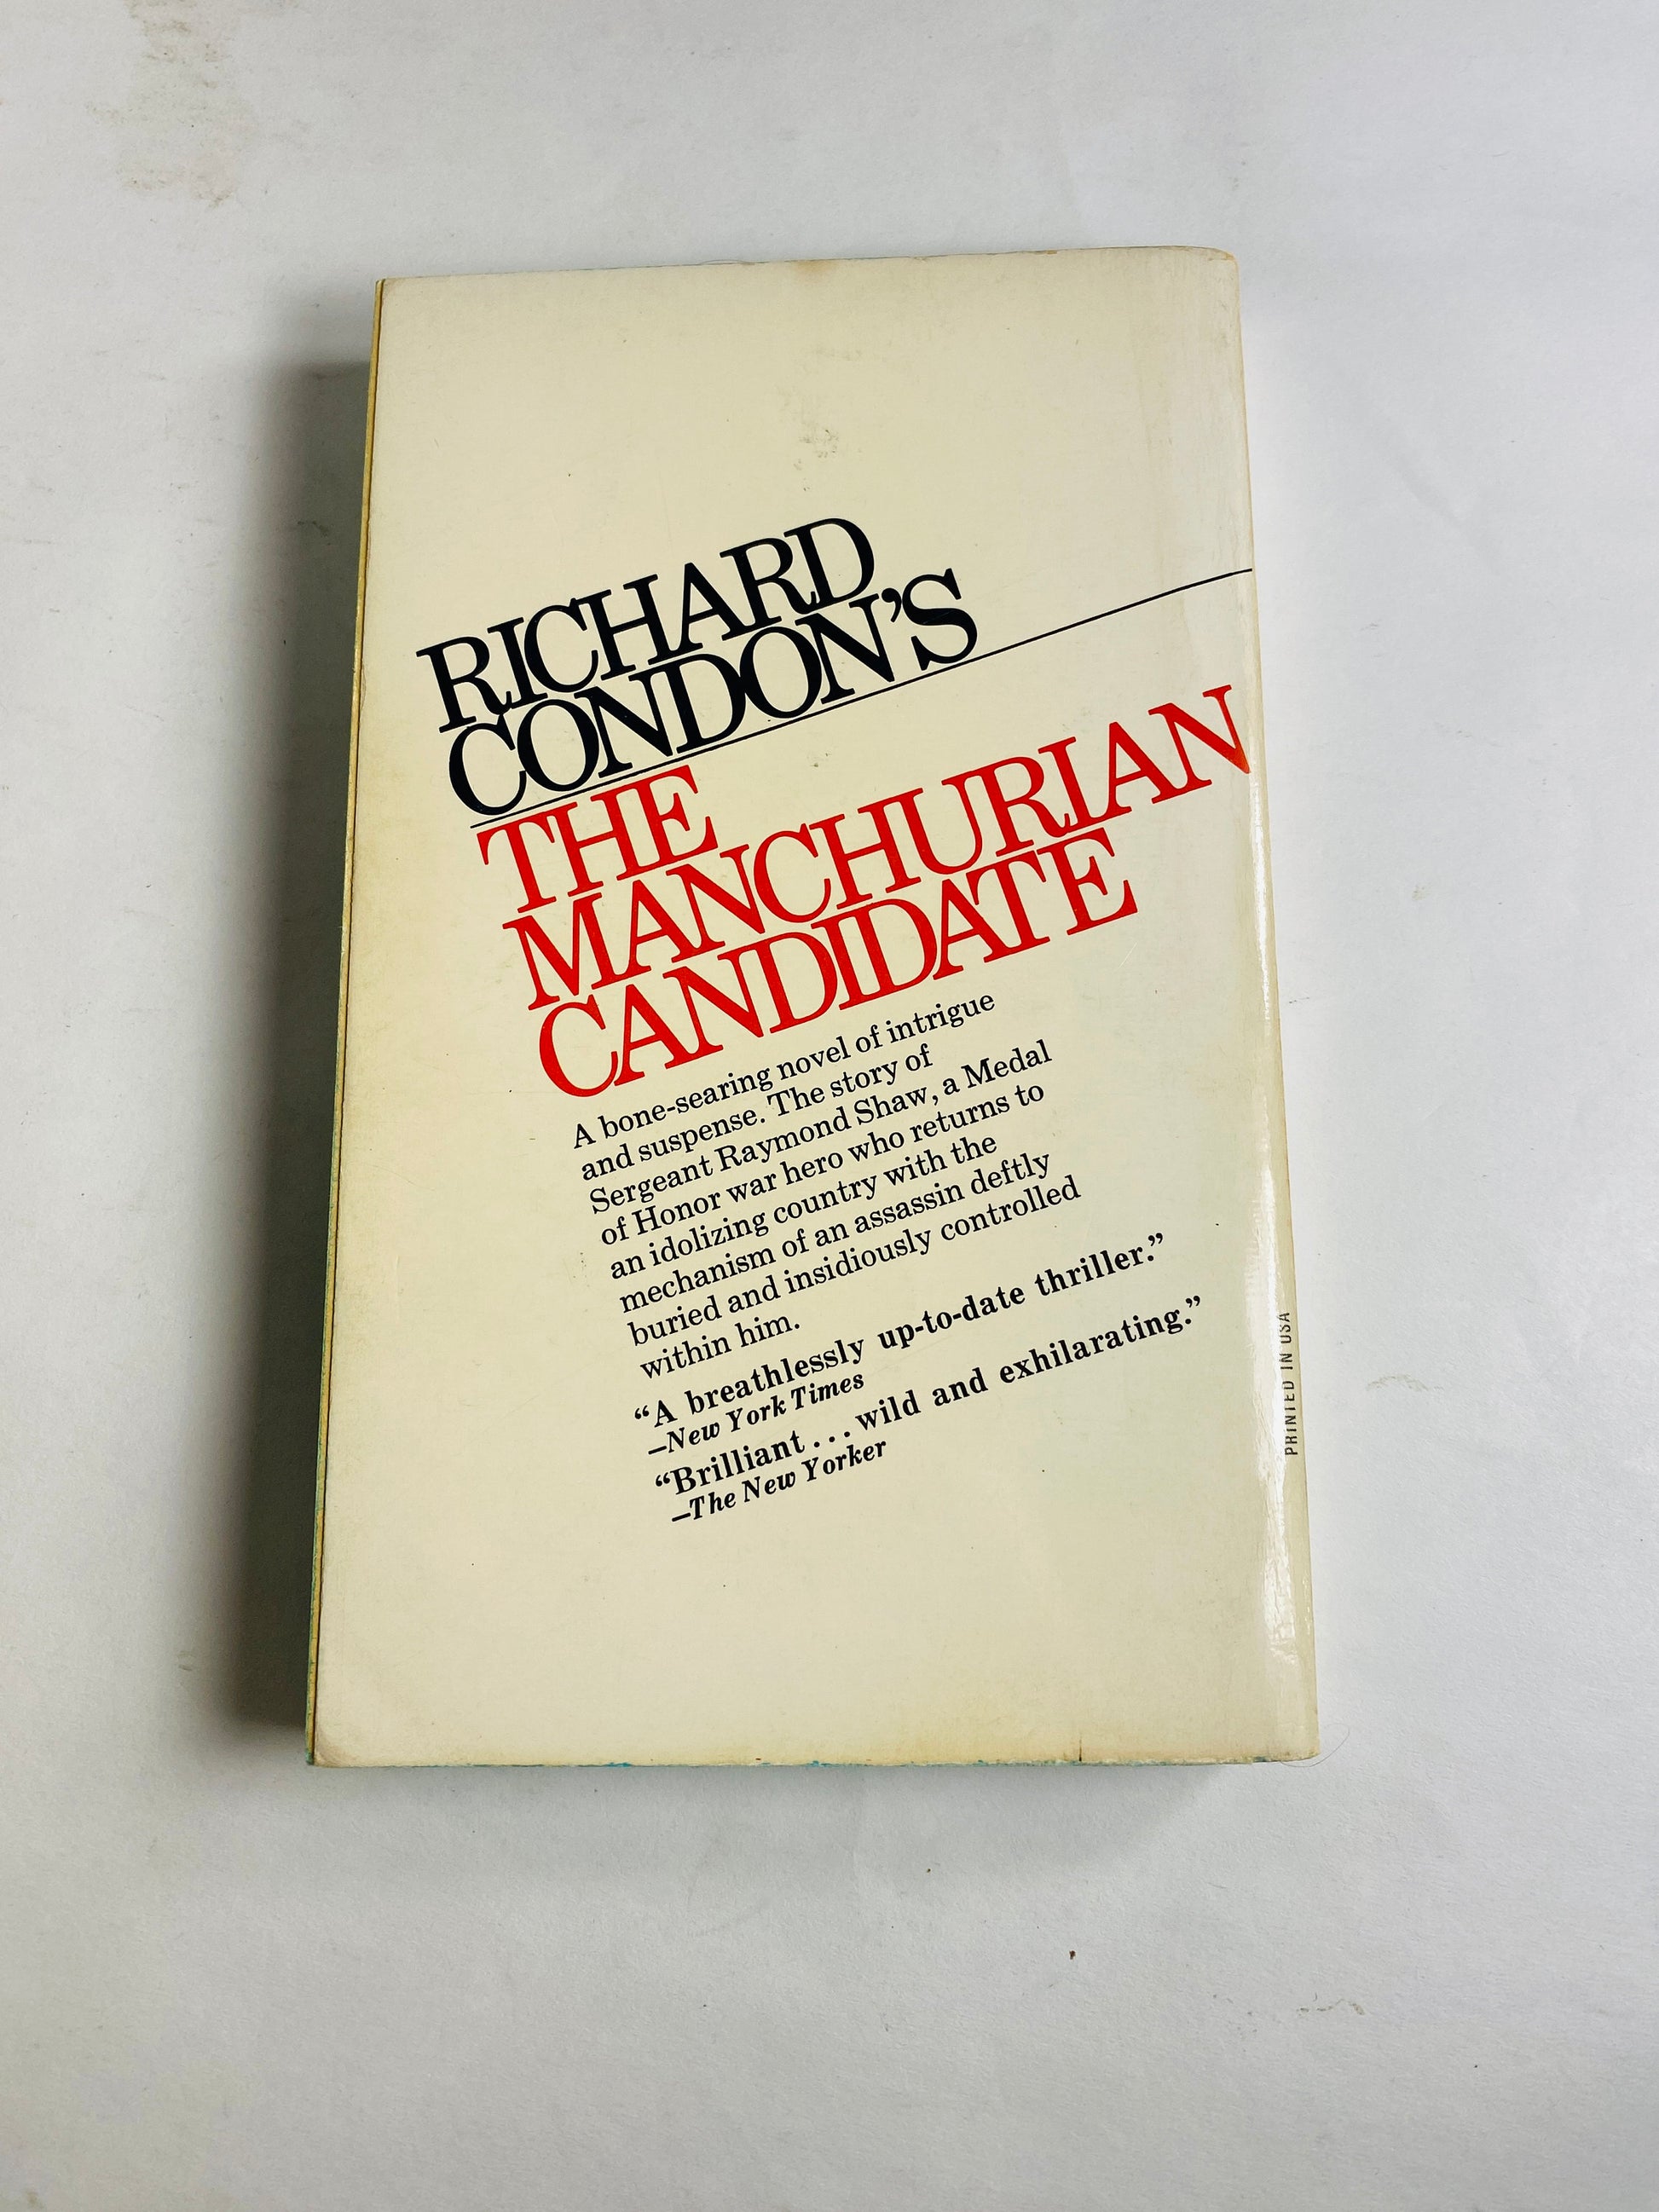 Manchurian Candidate vintage paperback book by Richard Condon circa 1974 Political thriller about becoming a Communist assassin